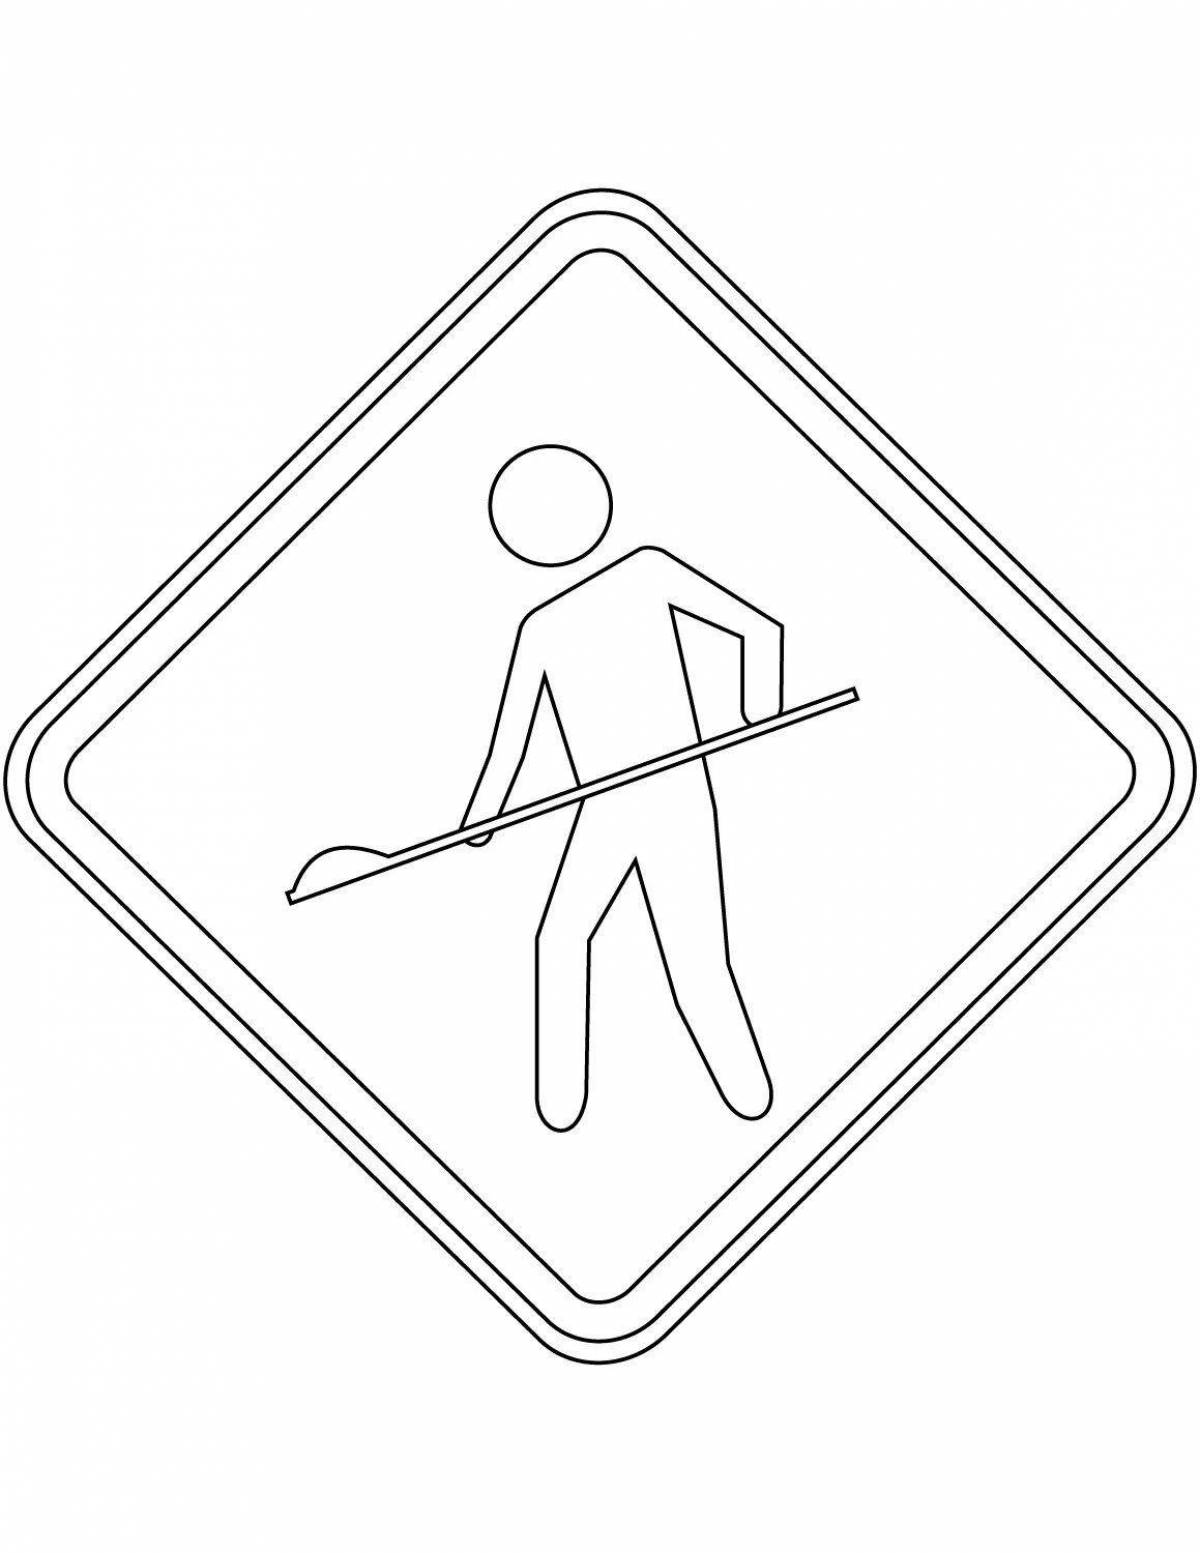 Coloring intensive pedestrian signs